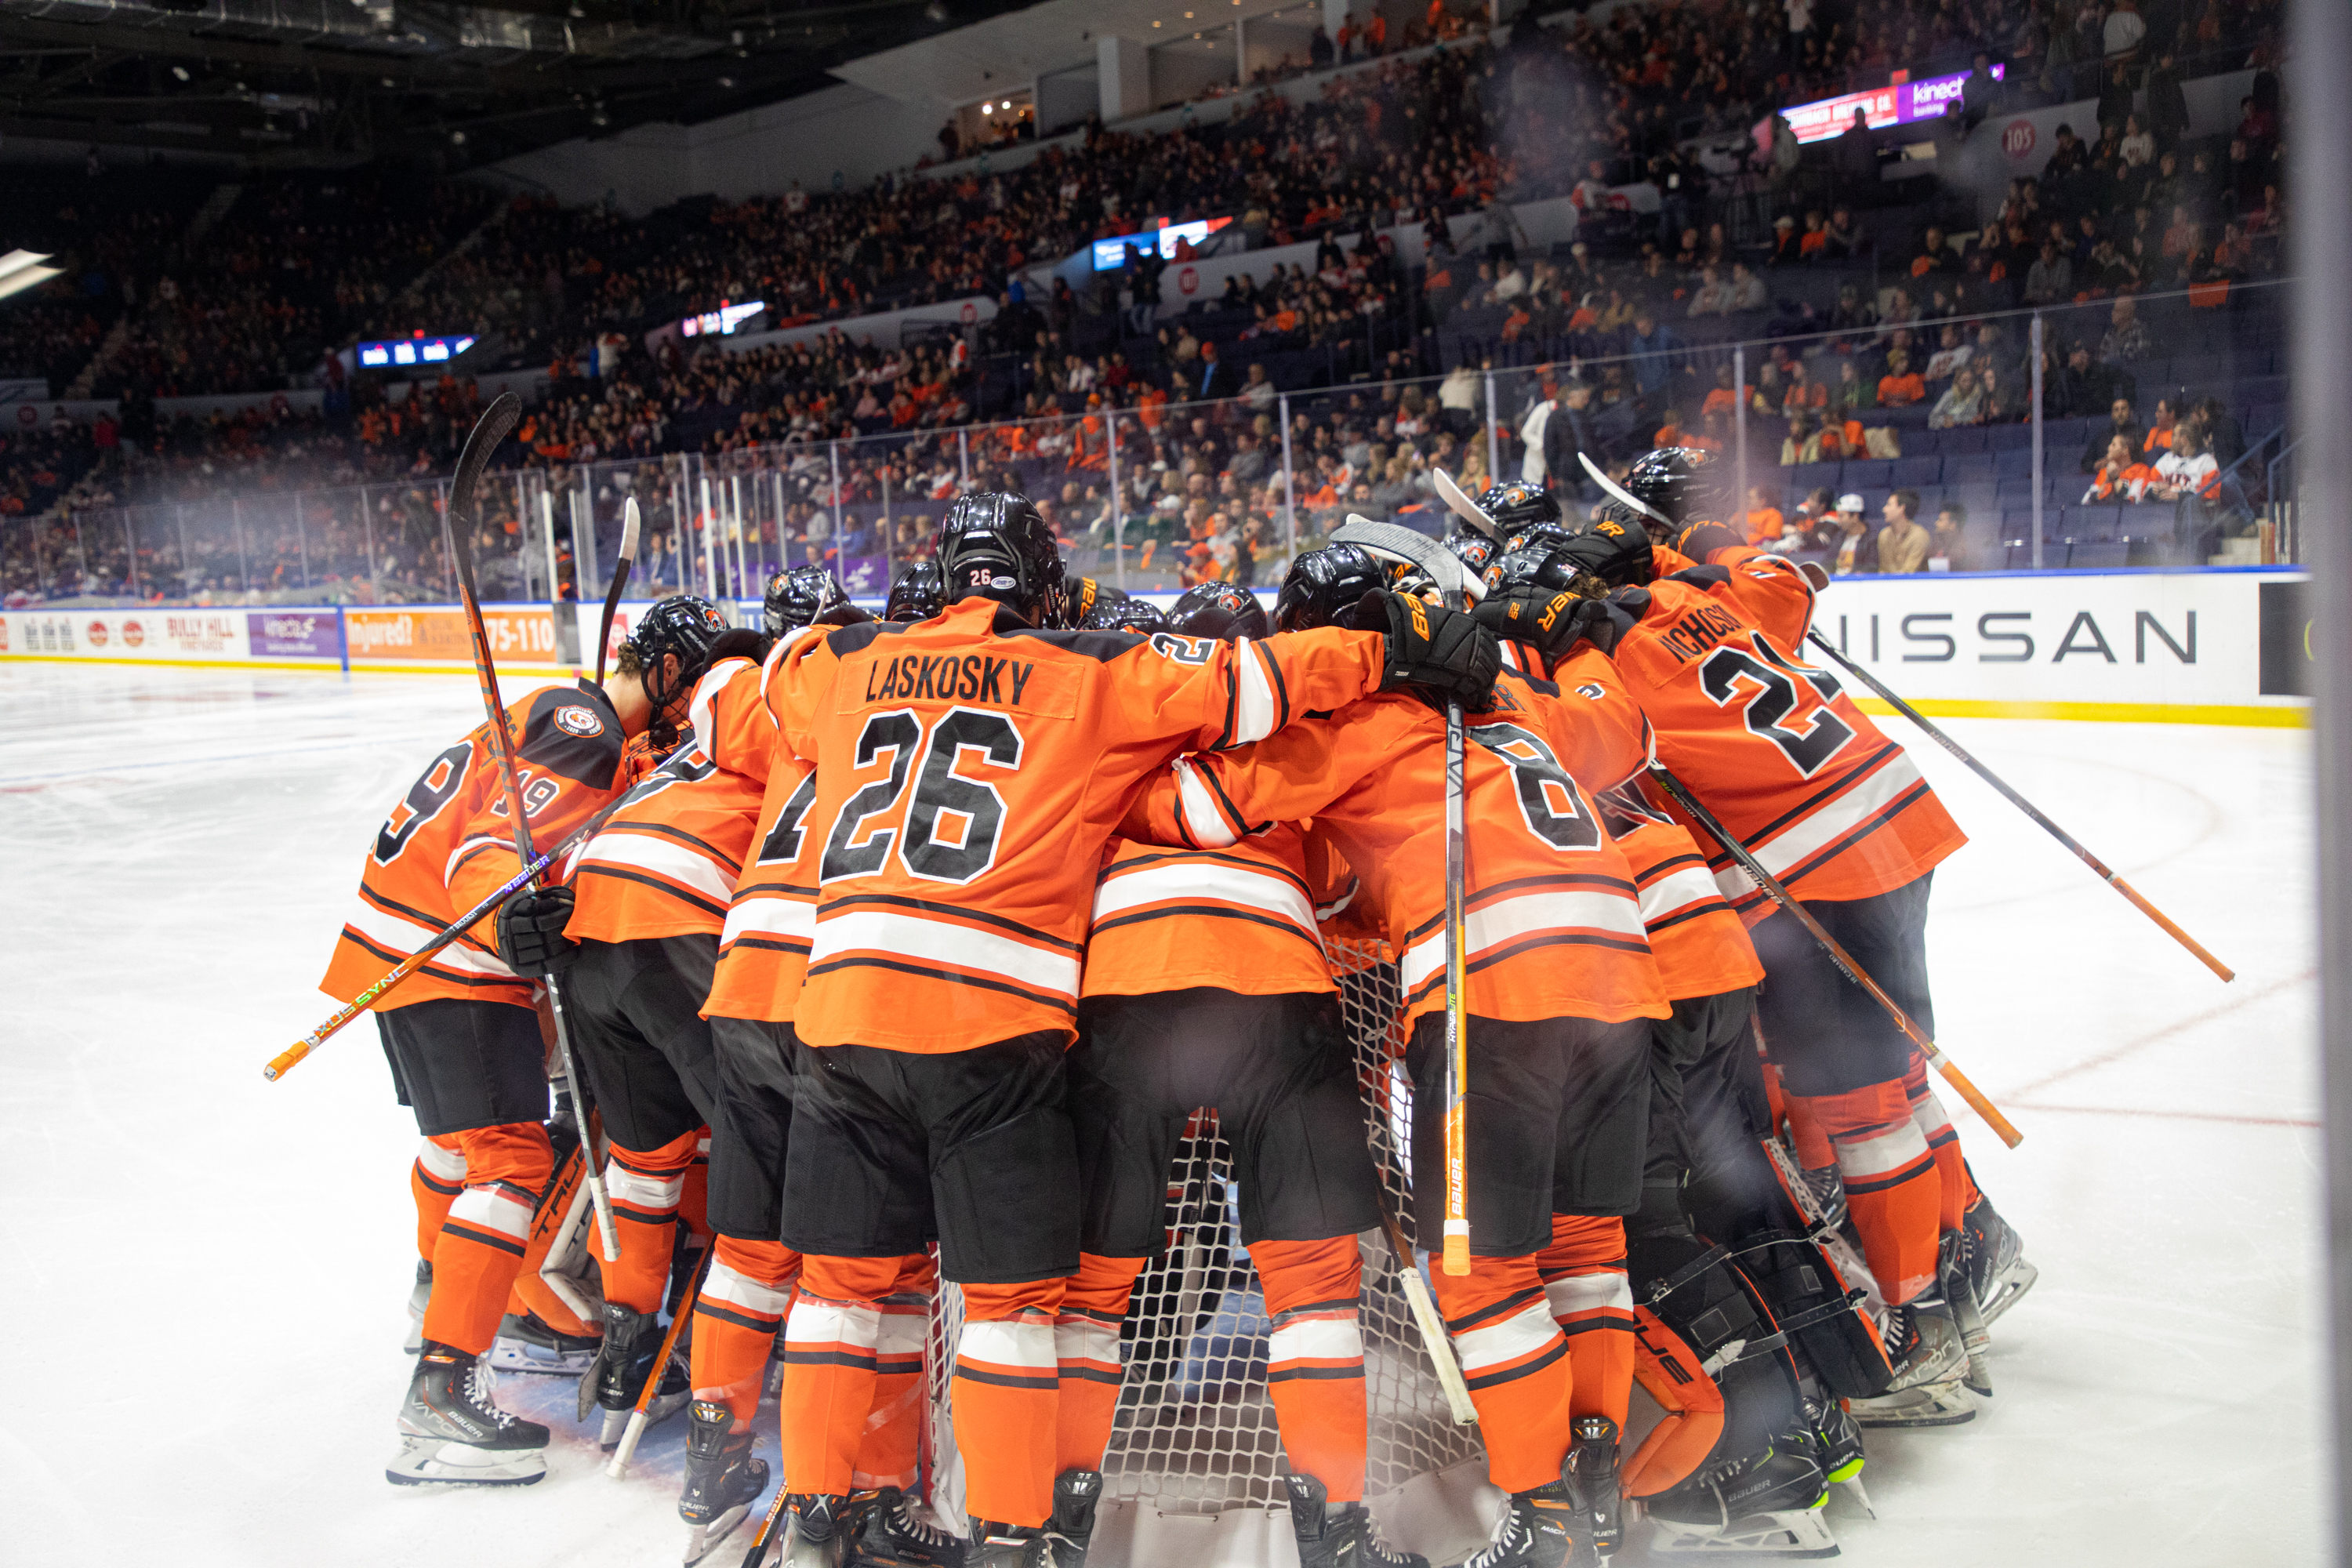 a huddle of RIT men's hockey players